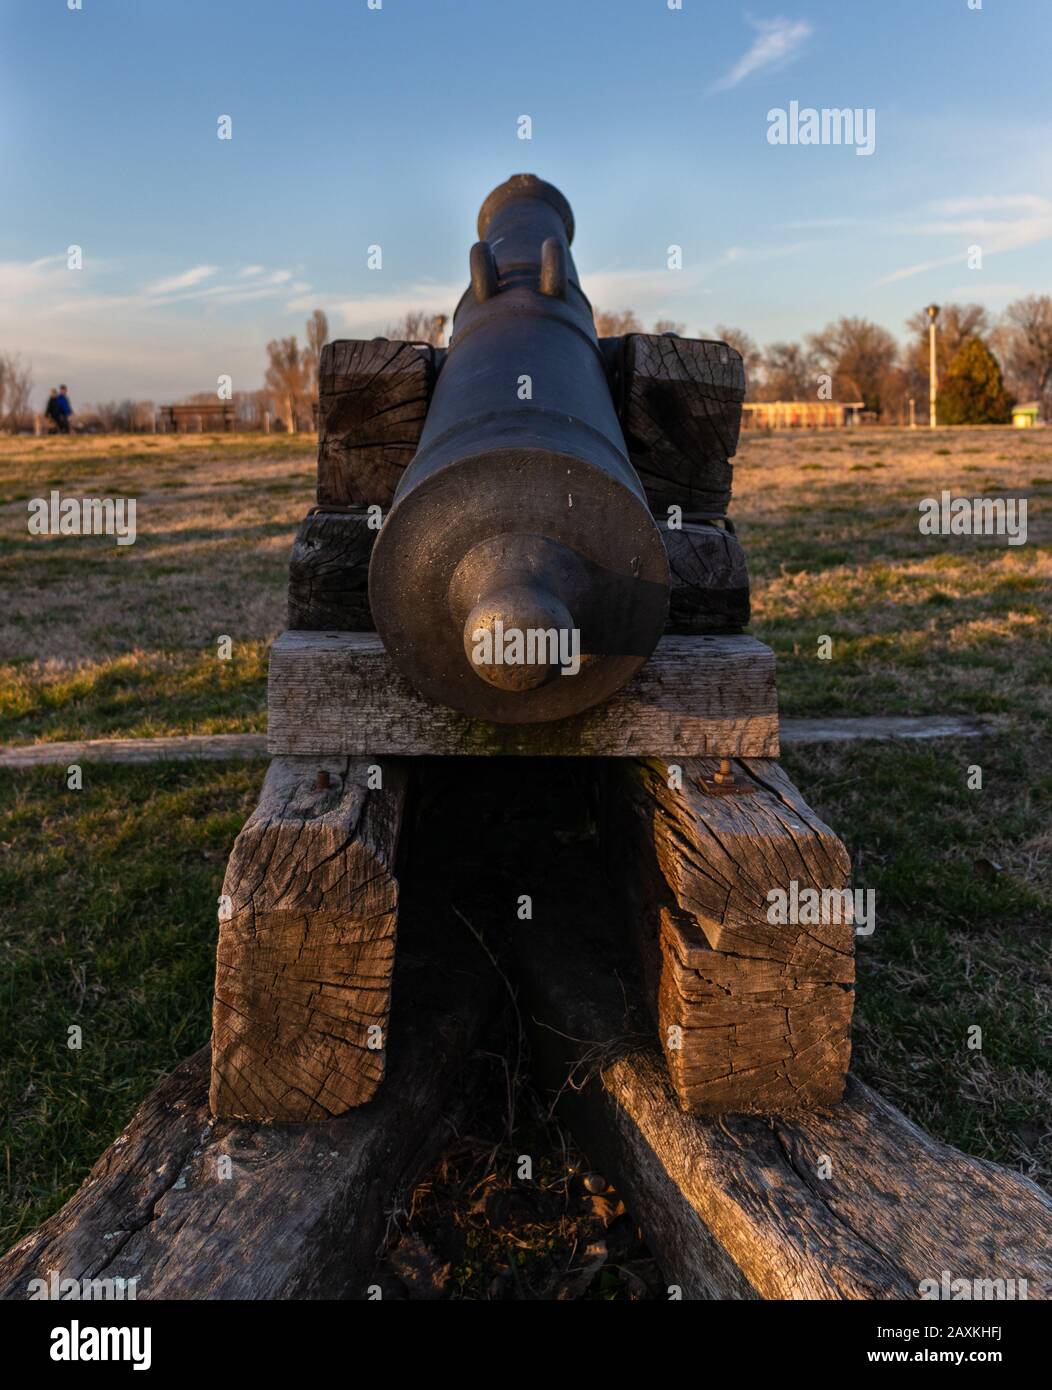 Behind shot of an old rusty canon in a grassy field Stock Photo